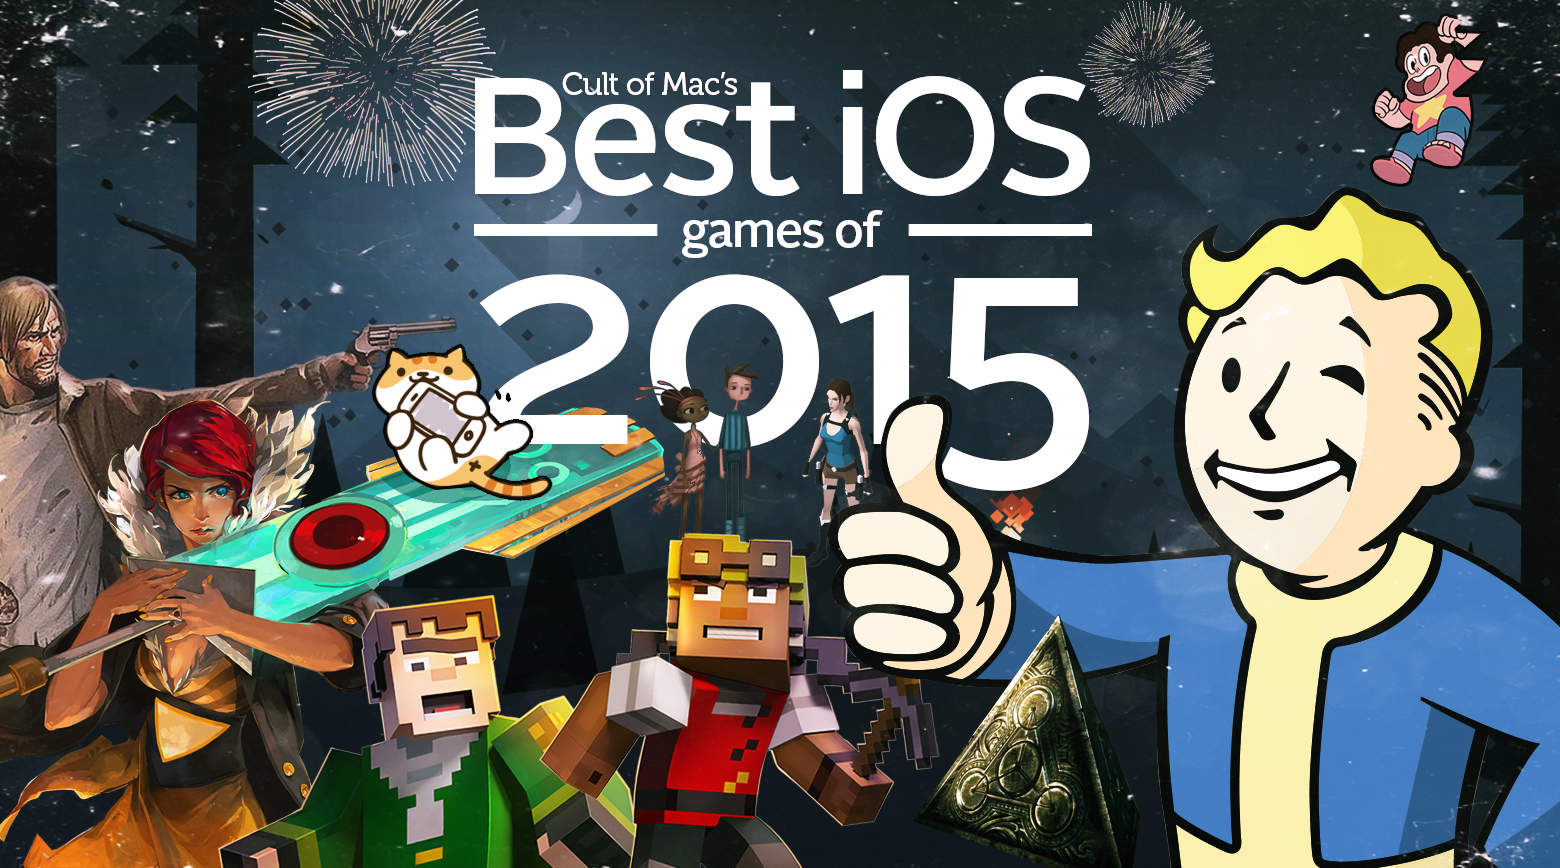 The best iOS games of the year.